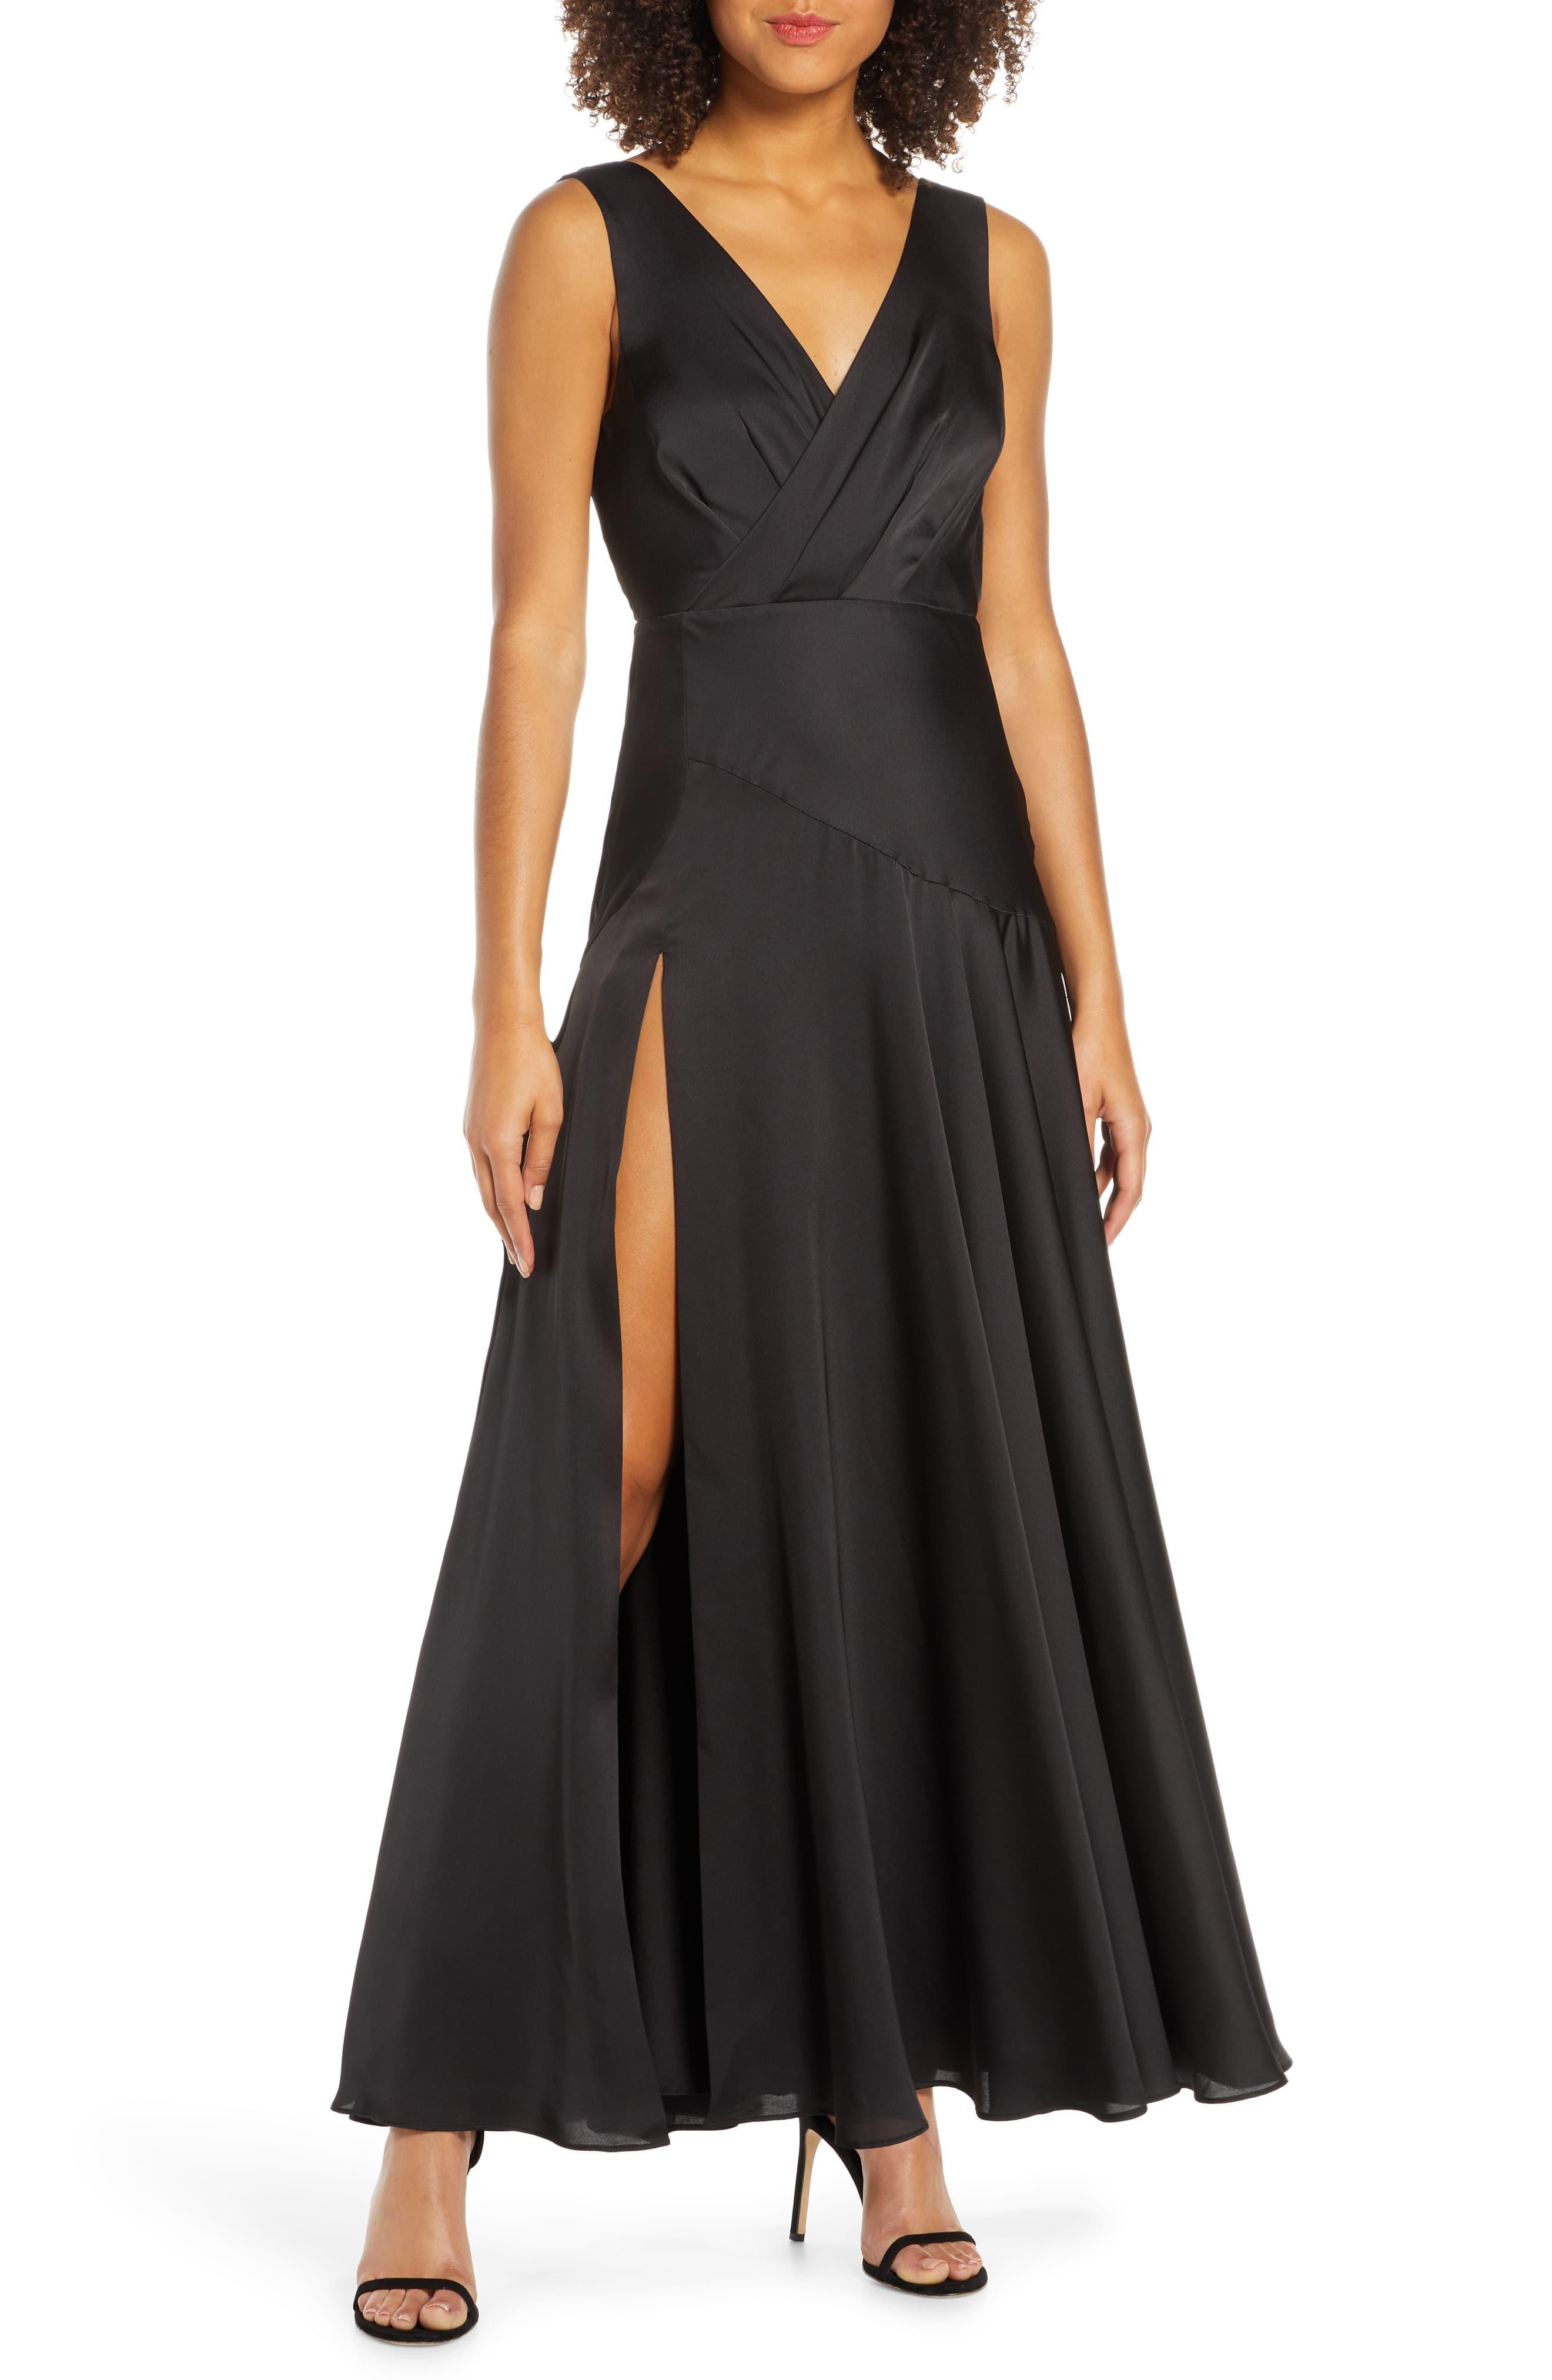 Fame & Partners Pleat Chiffon Gown in Black - Lyst